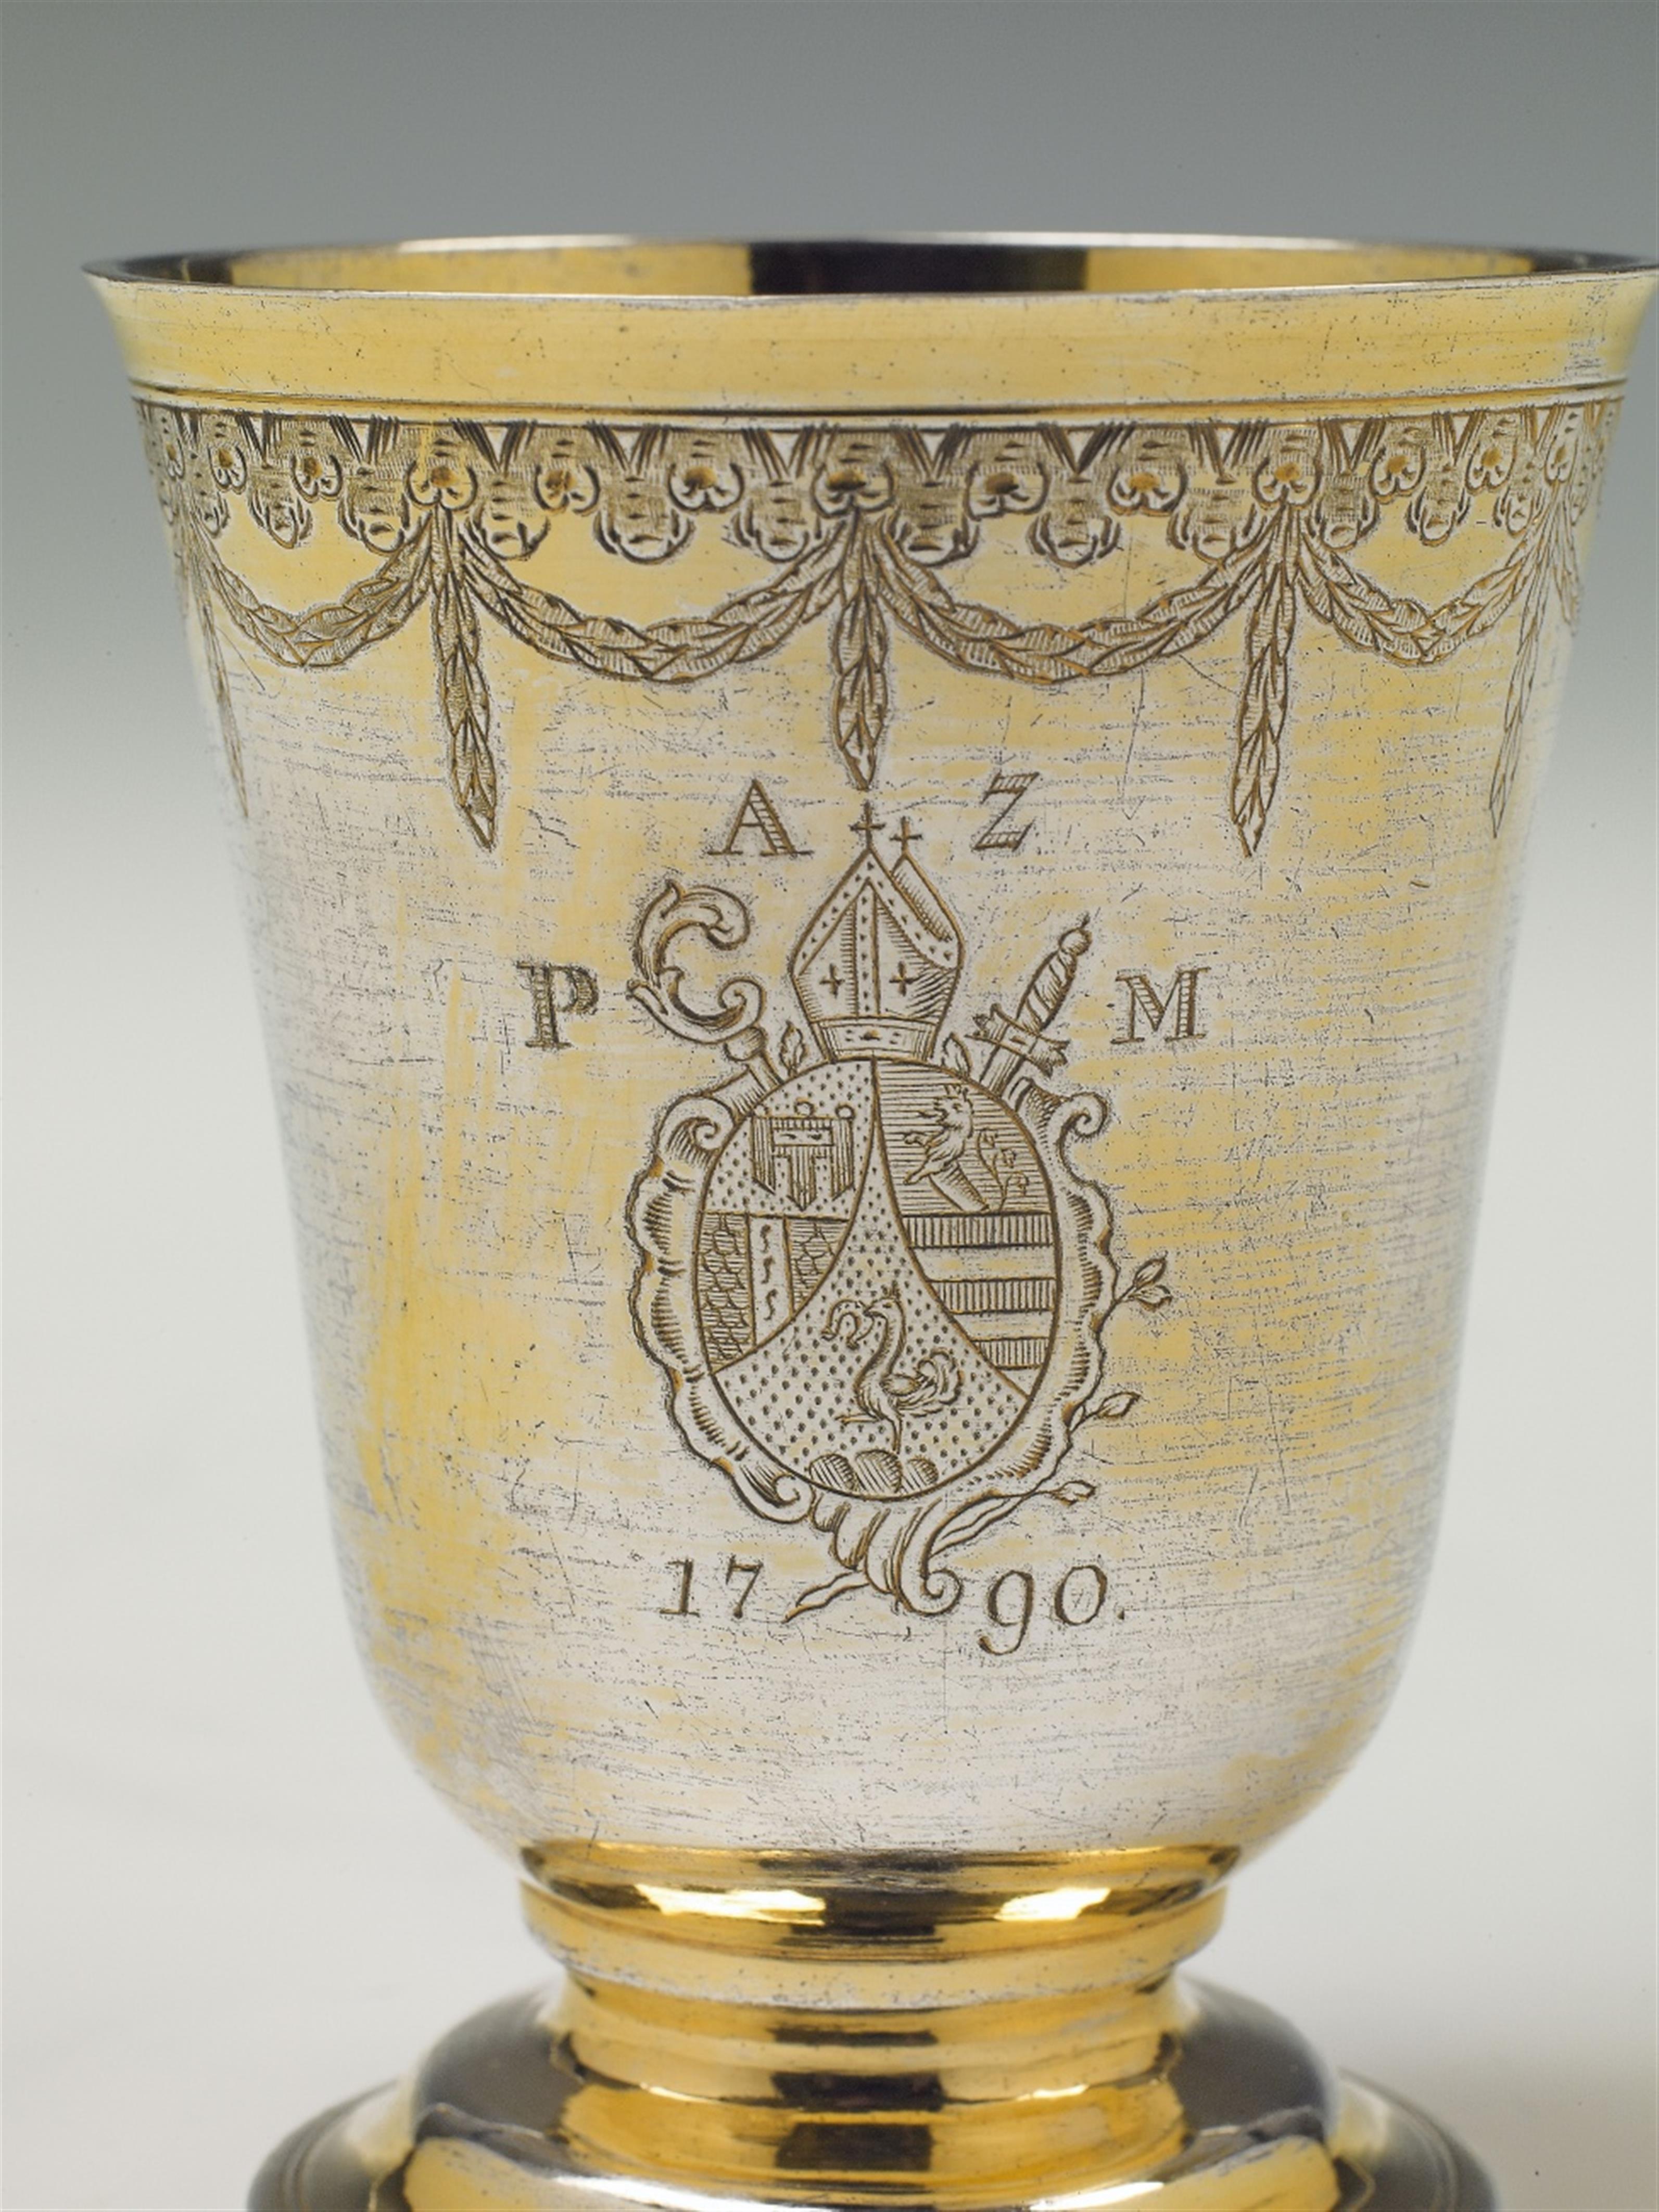 An important pair of Augsburg silver gilt abbot's beakers - Lot 1067